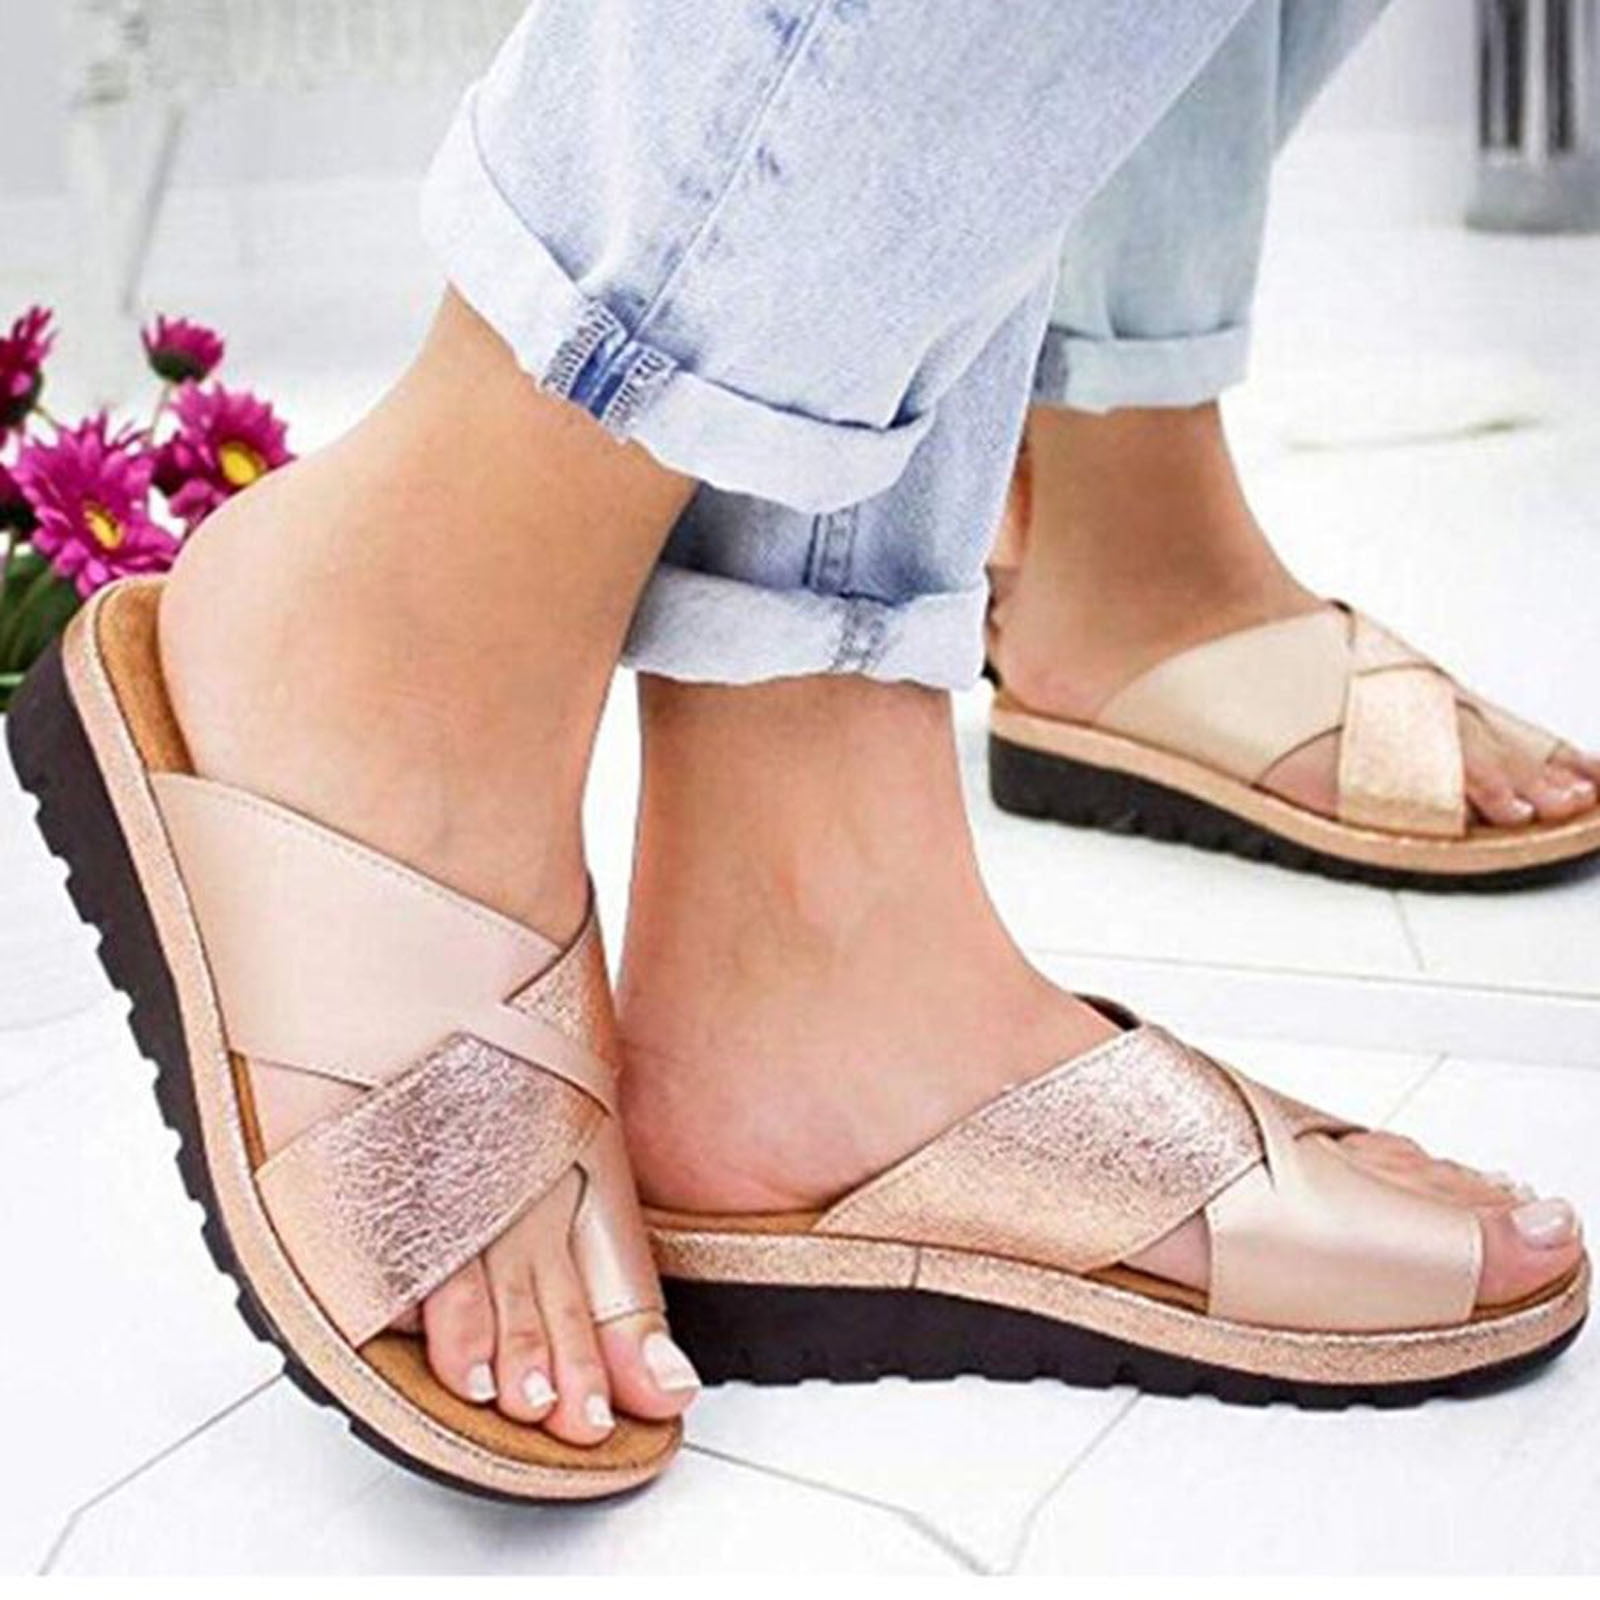 Details about   Womens Orthopedic Slip On Sandals Flip Flop Open Toe Wedge Slippers Summer Shoes 